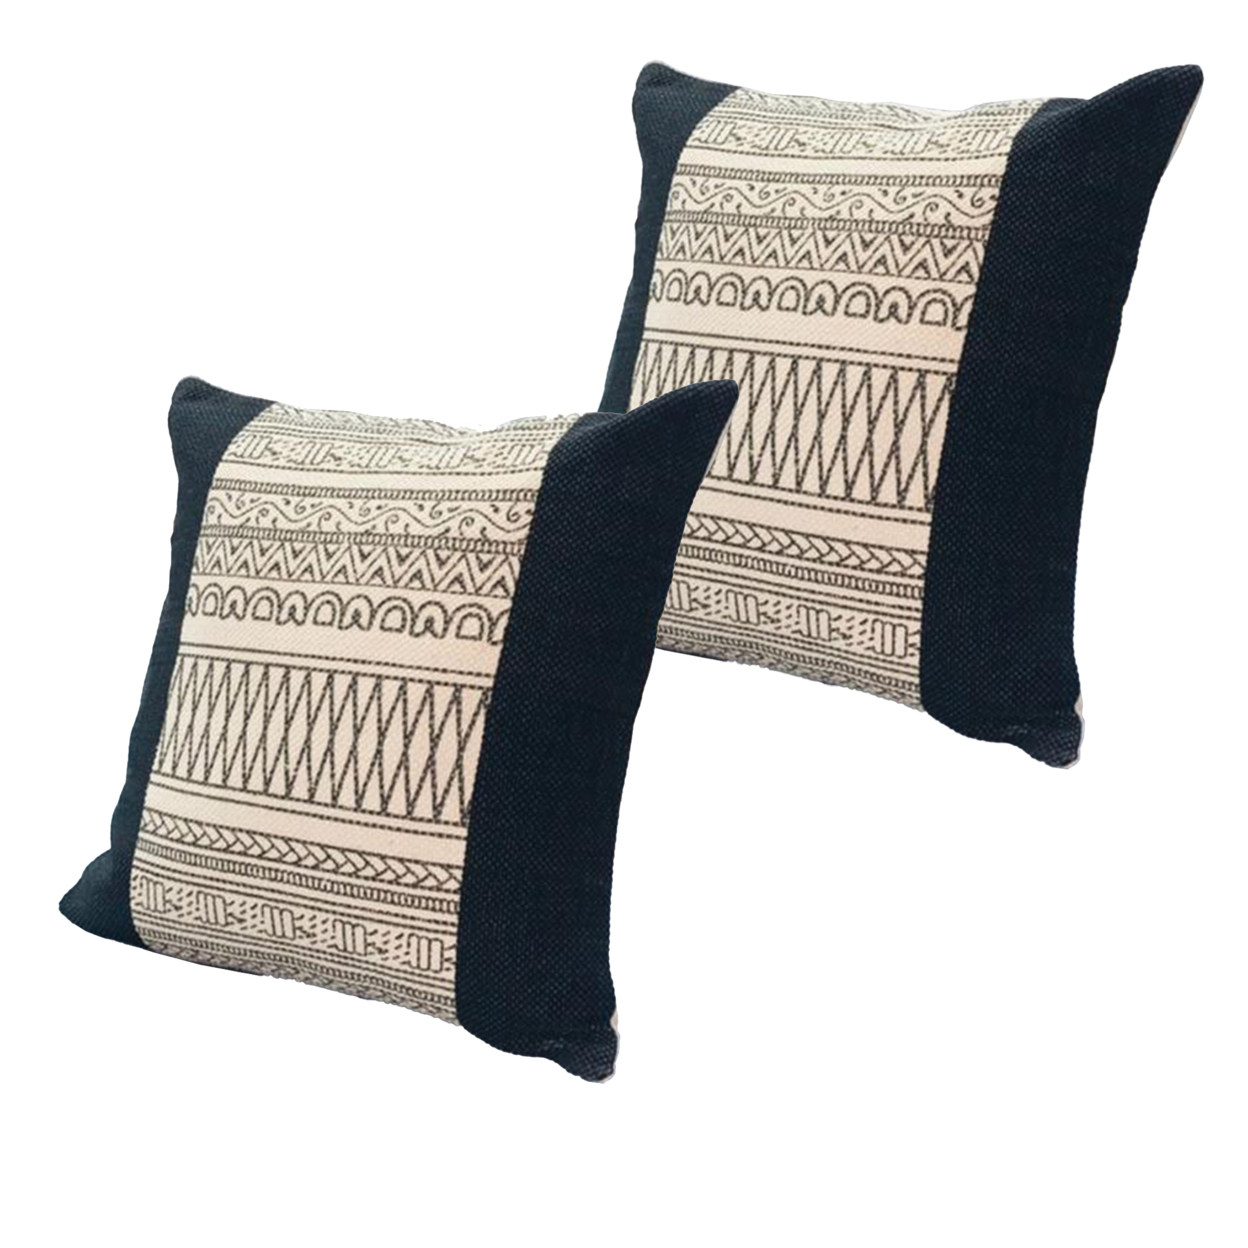 18 X 18 Square Cotton Accent Throw Pillows, Aztec Linework Pattern, Set Of 2, Off White, Black